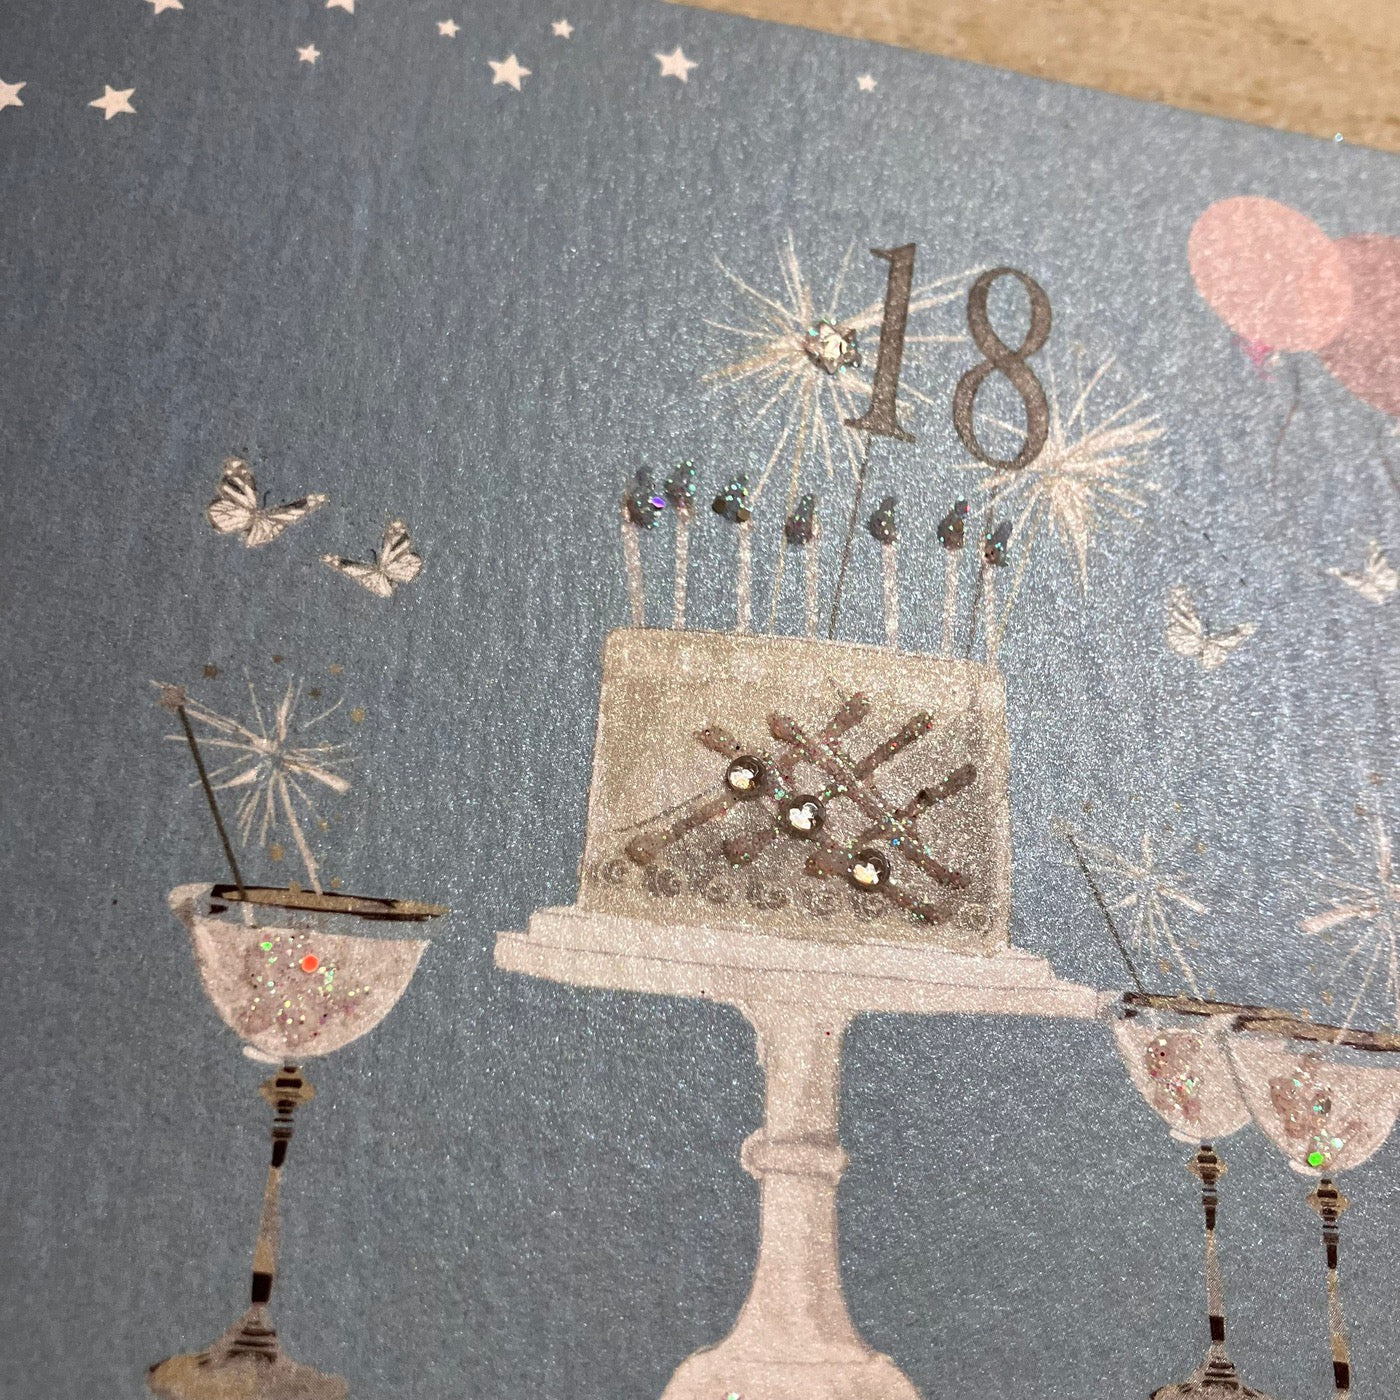 18th Birthday Teal Blue Sparkly Cake & Glasses Card - White Cotton Cards